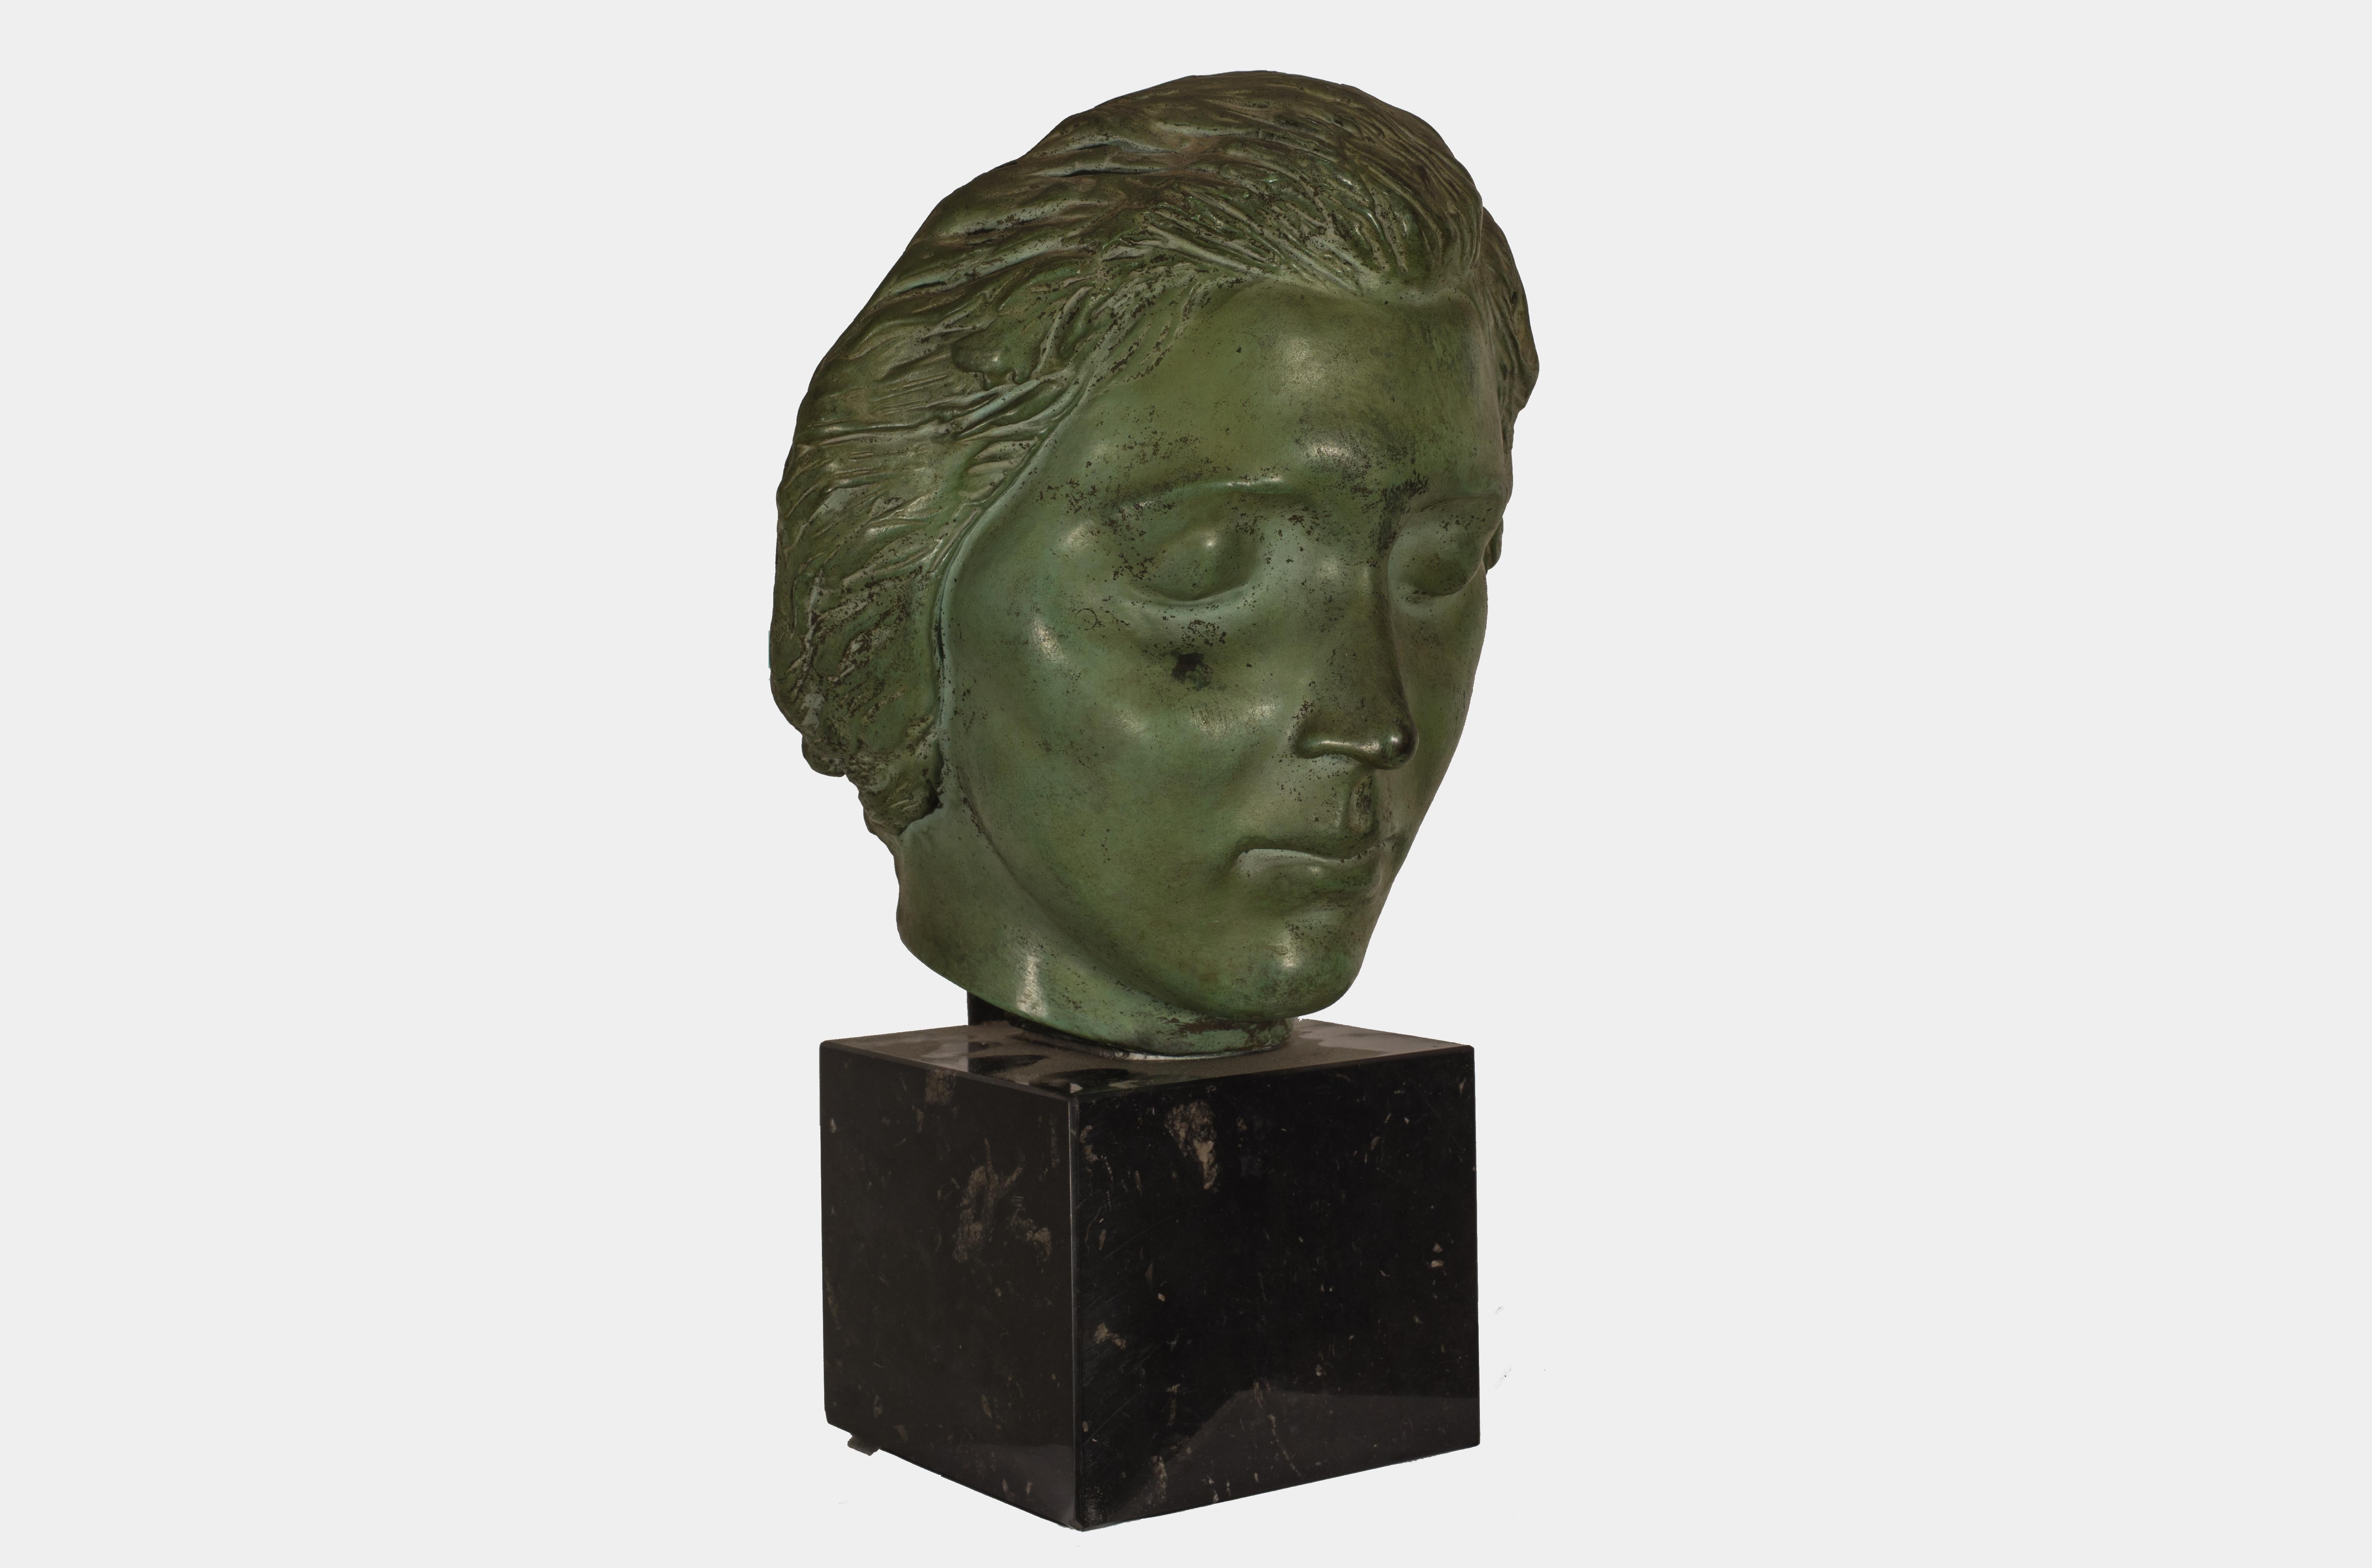 Female face - Other Art Style Sculpture by Alfredo Biagini